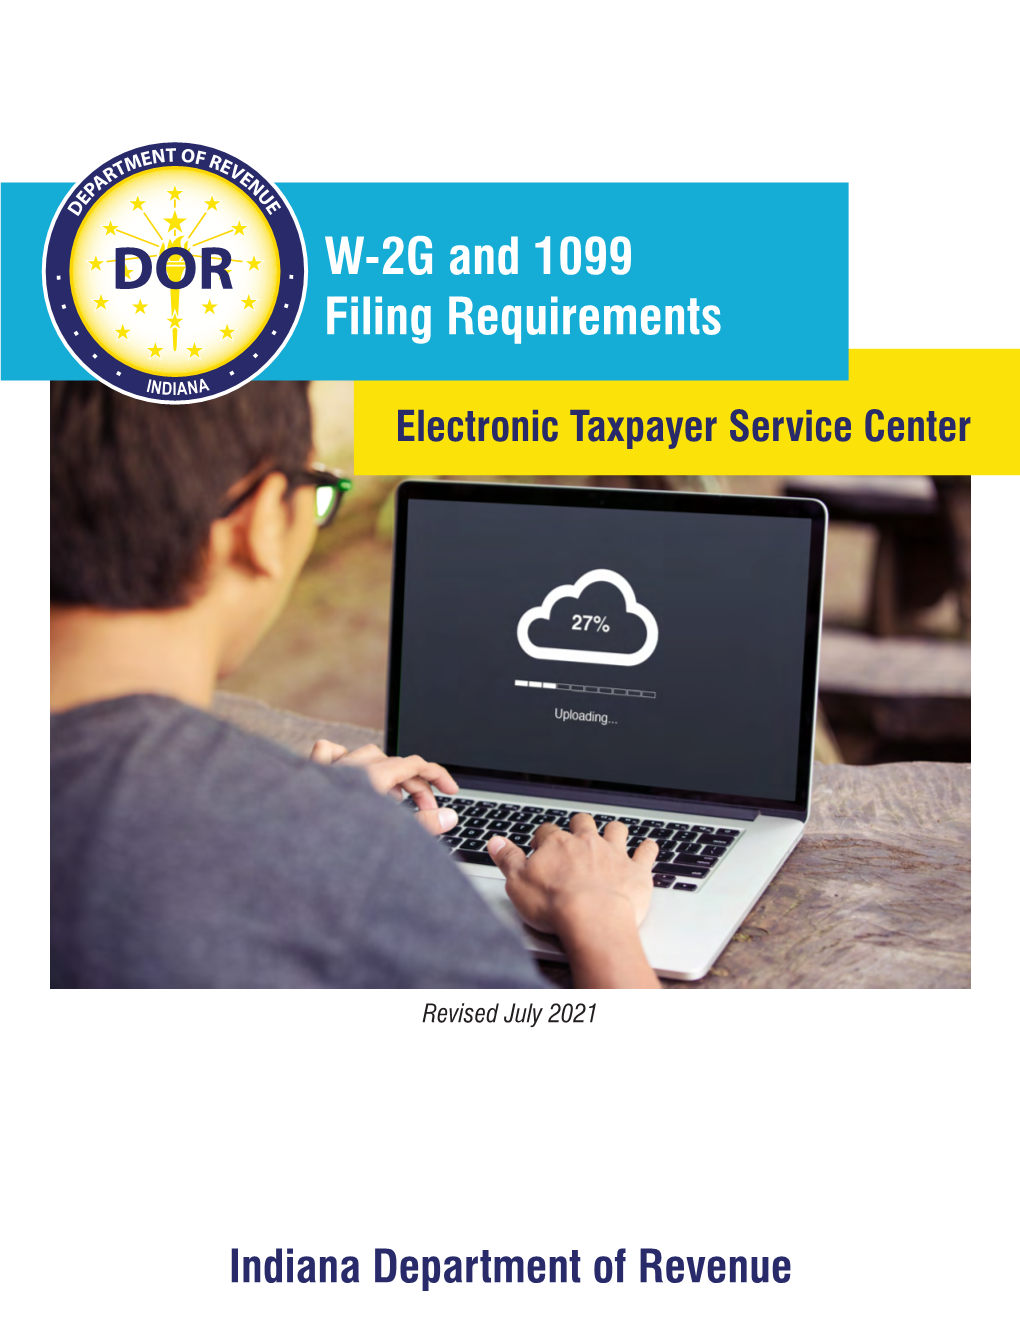 W-2G and 1099 Filing Requirements